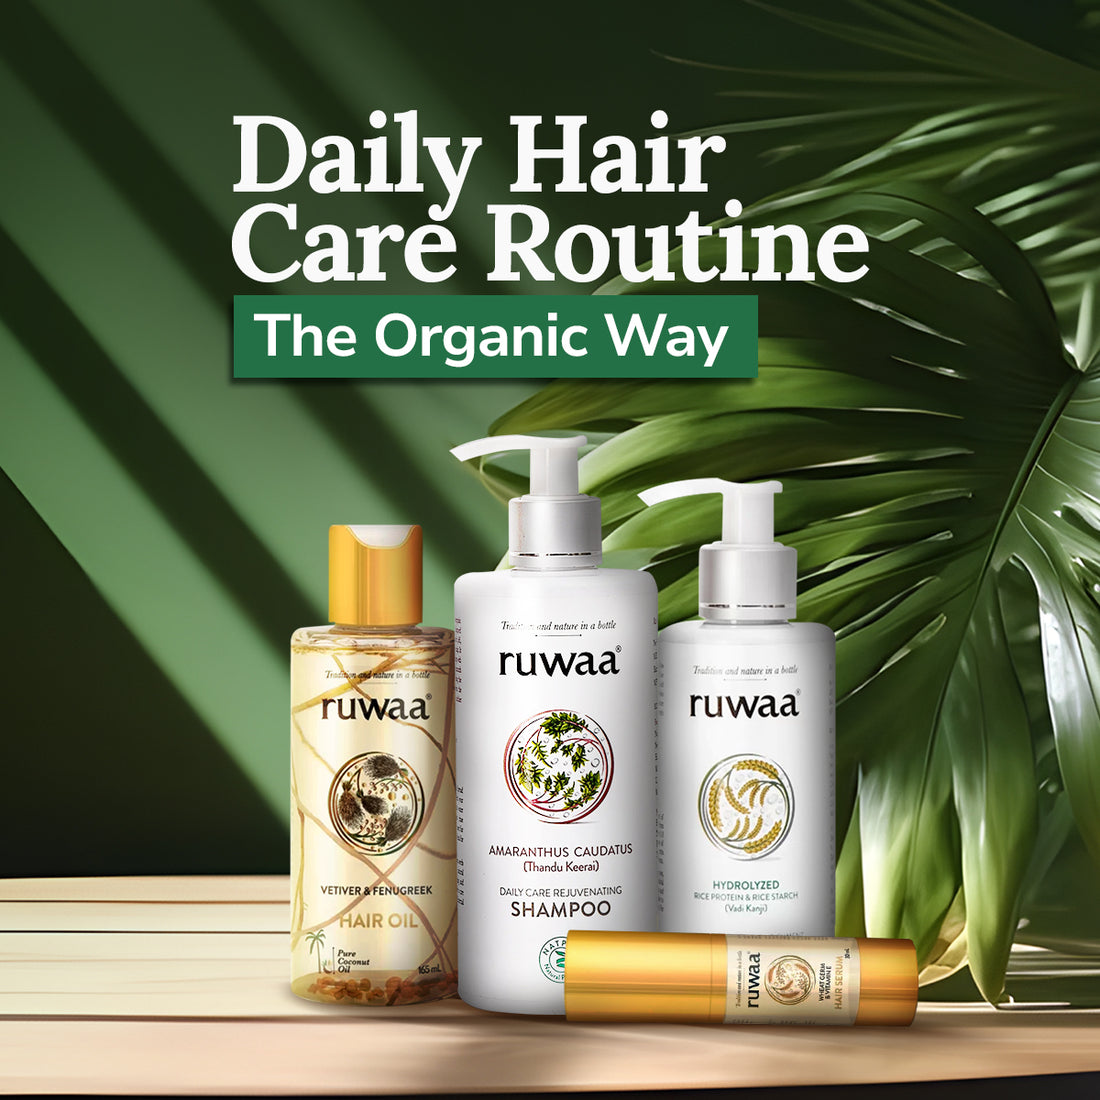 Daily Hair Care Routine: The Organic Way